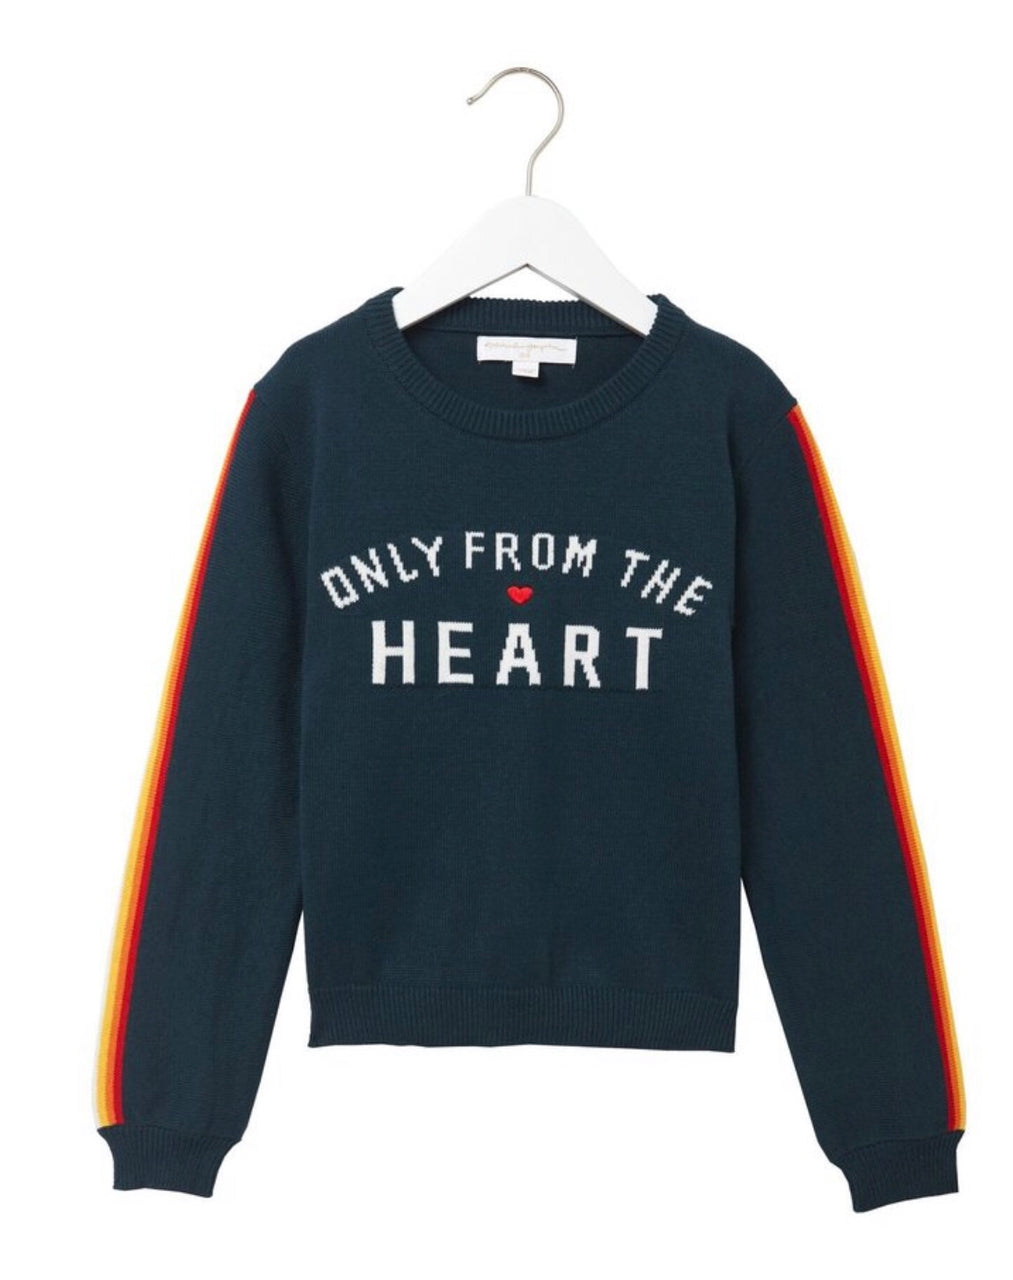 From Heart Sweater - Spruce